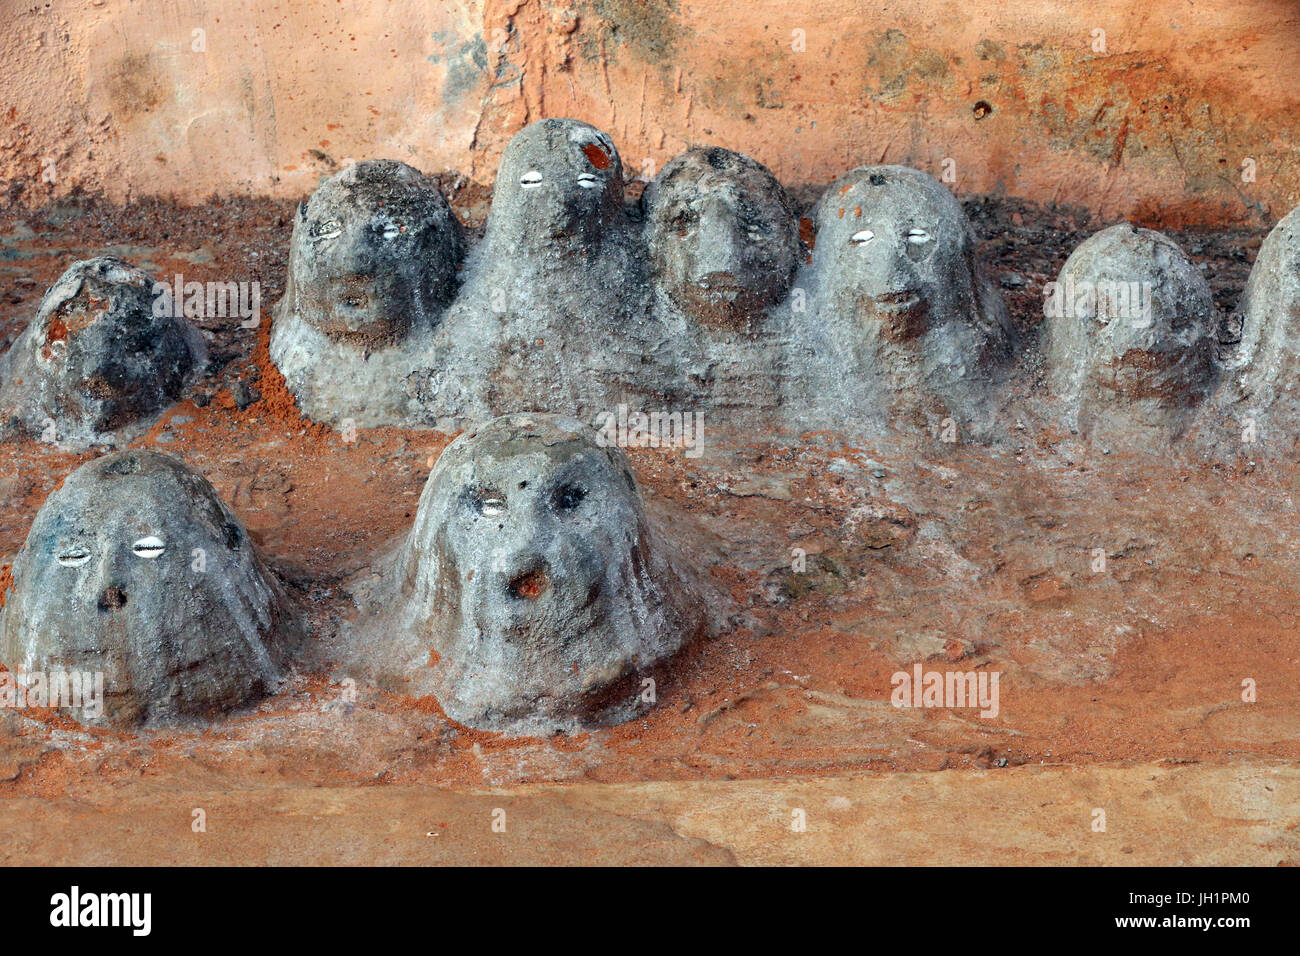 Voodoo fetishes at the entrance of a convent. Togoville, Togo. Stock Photo